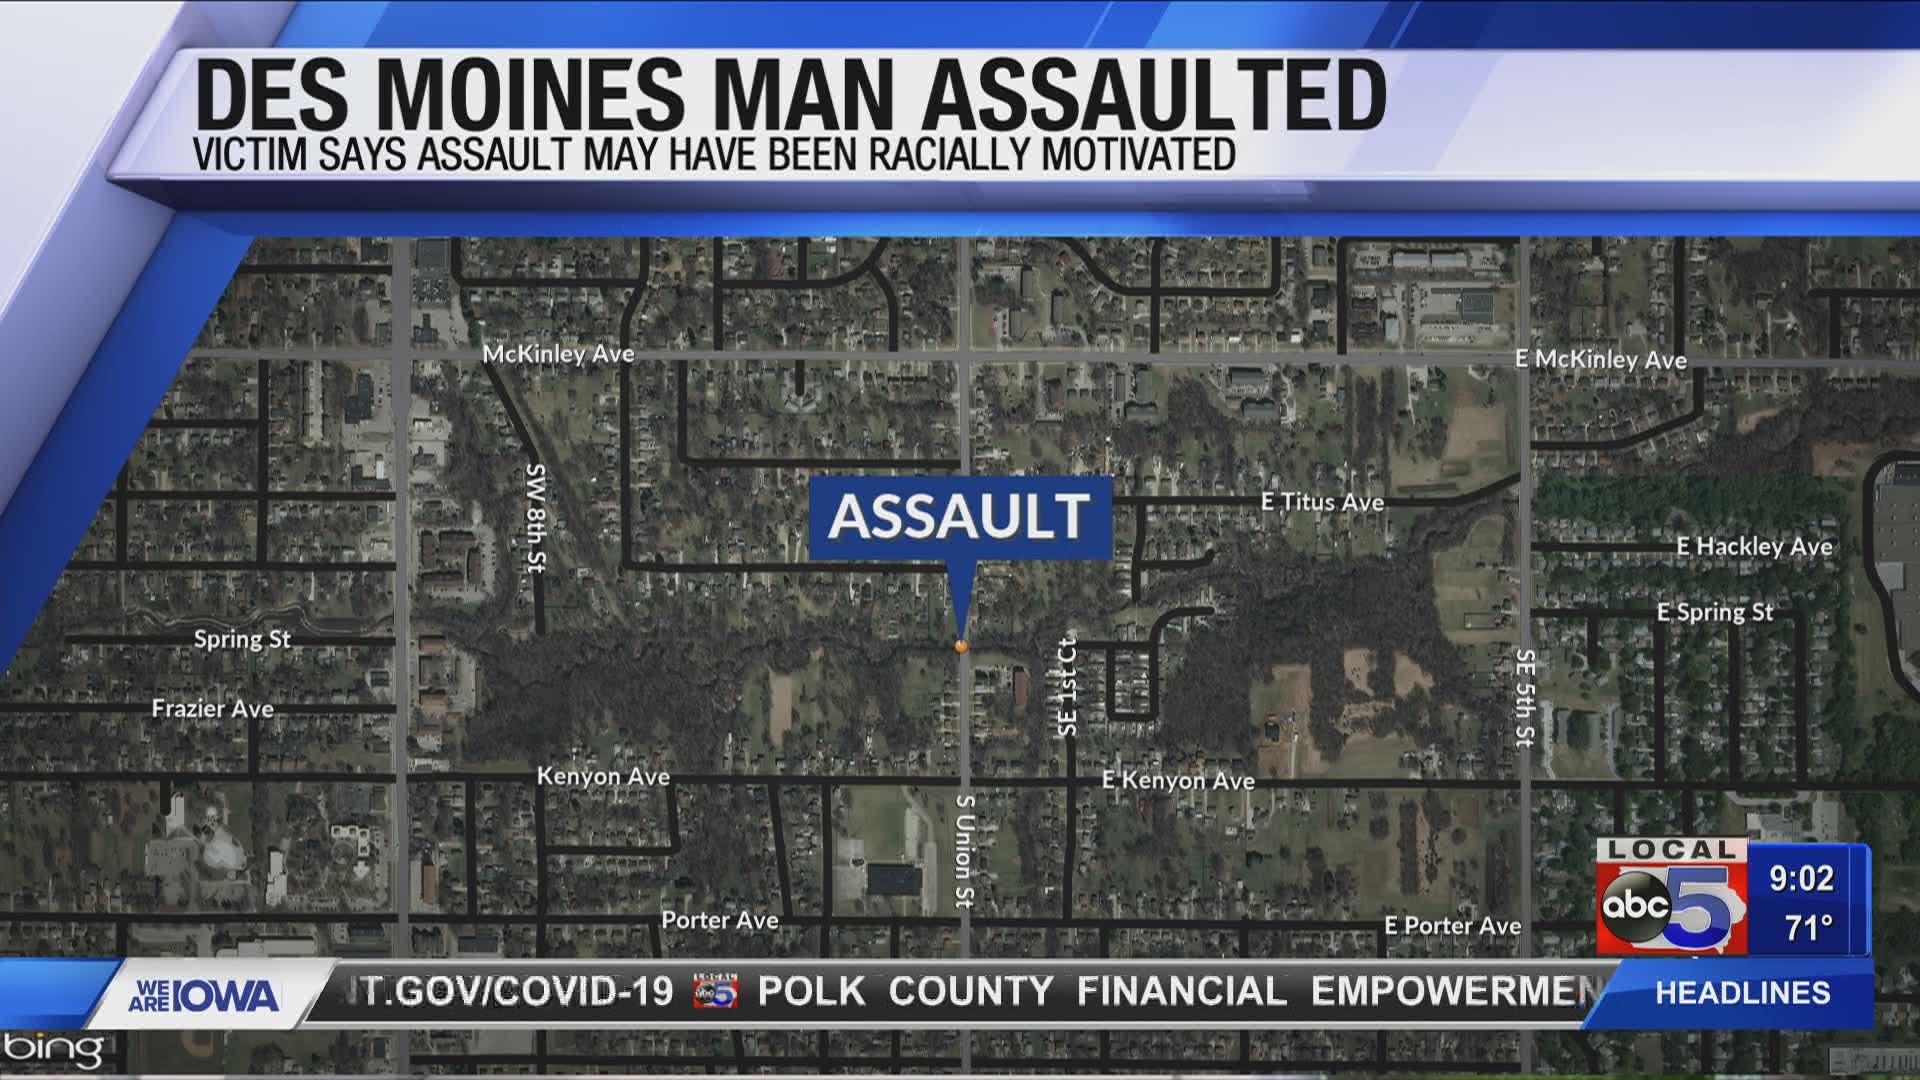 Police said the assault happened early Saturday morning. The victim, a black man, said one of his attackers made racist comments during the assault.